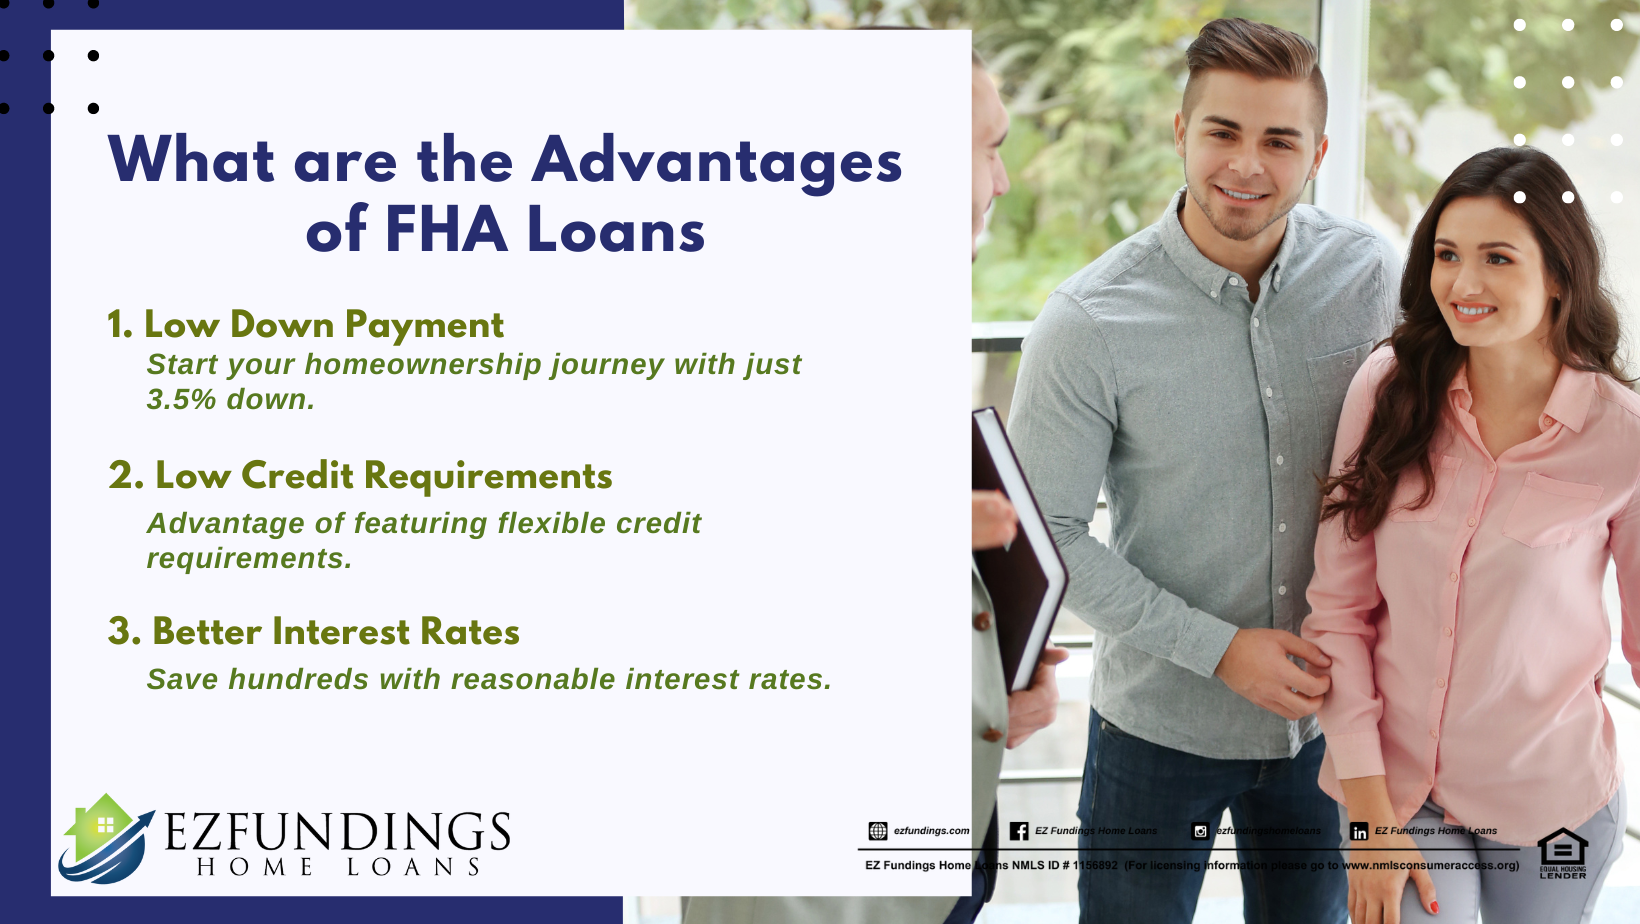 What Are the Advantages of FHA Loans: Low down payments, lenient credit, and better rates empower homebuyers for affordable homeownership.